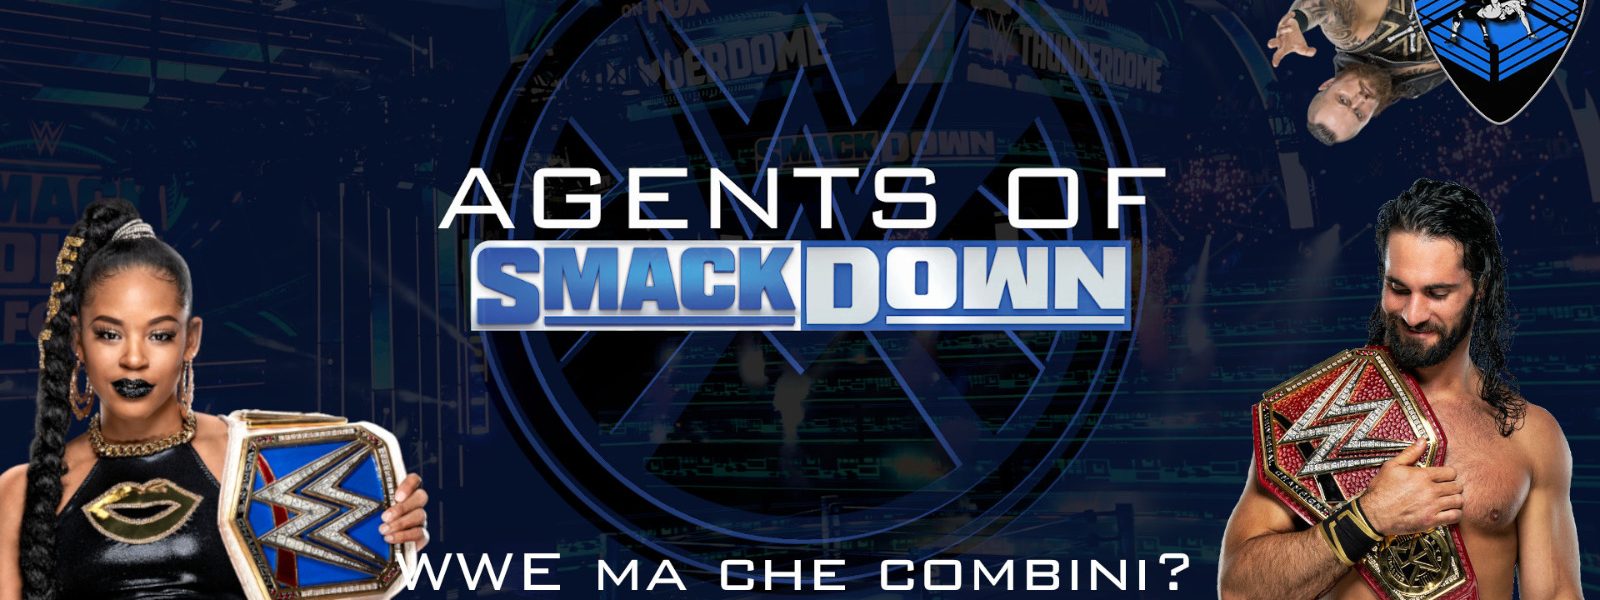 WWE ma che combini? (puntata polemica + speciale Seth Rollins) - Agents Of Smackdown EP.9